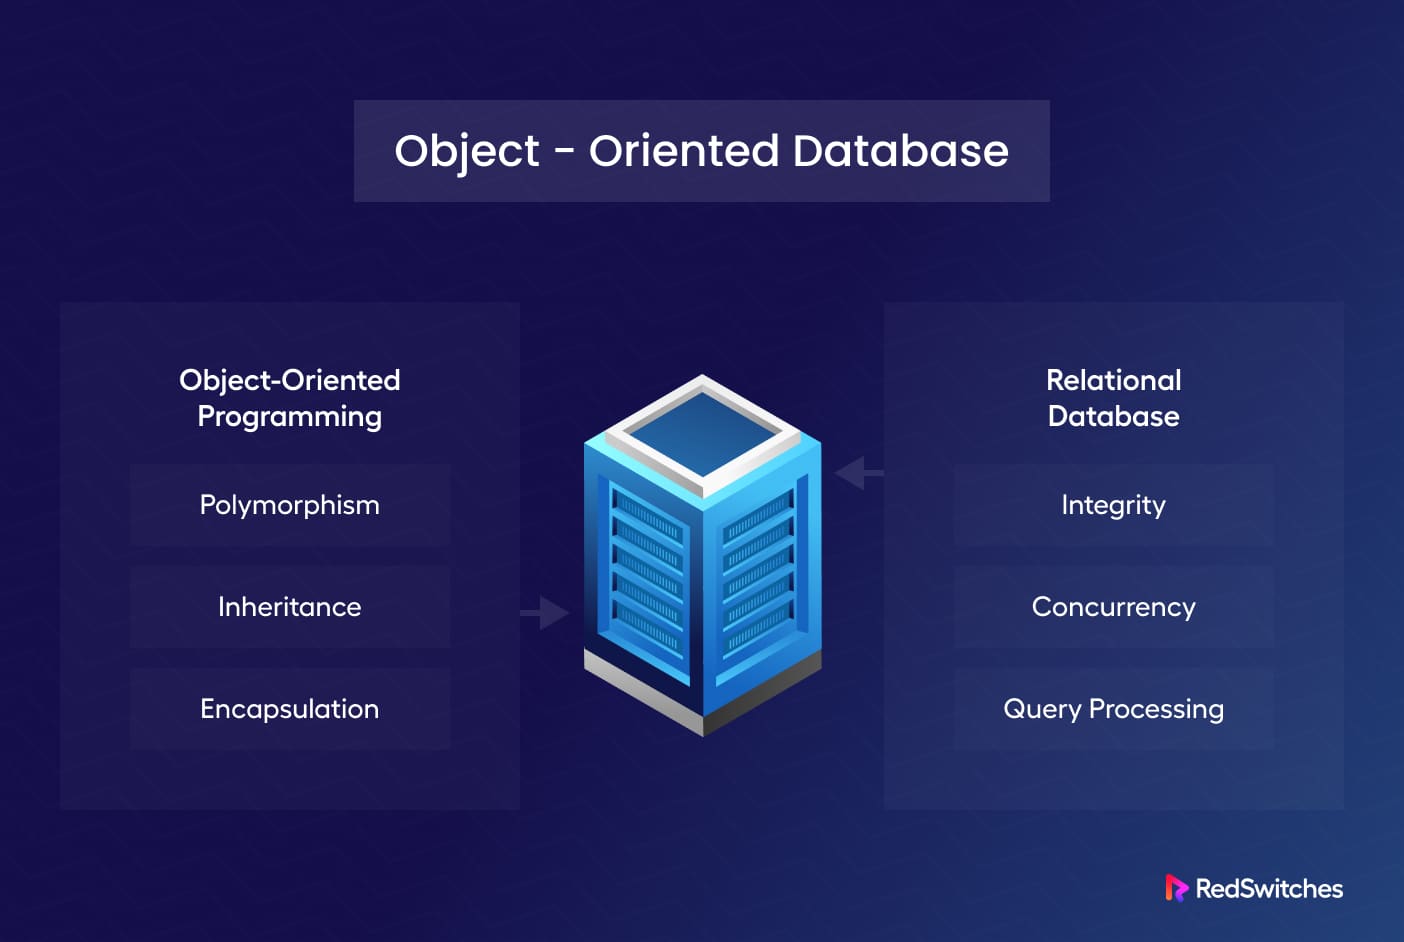 Object Oriented Database on of the type of databases